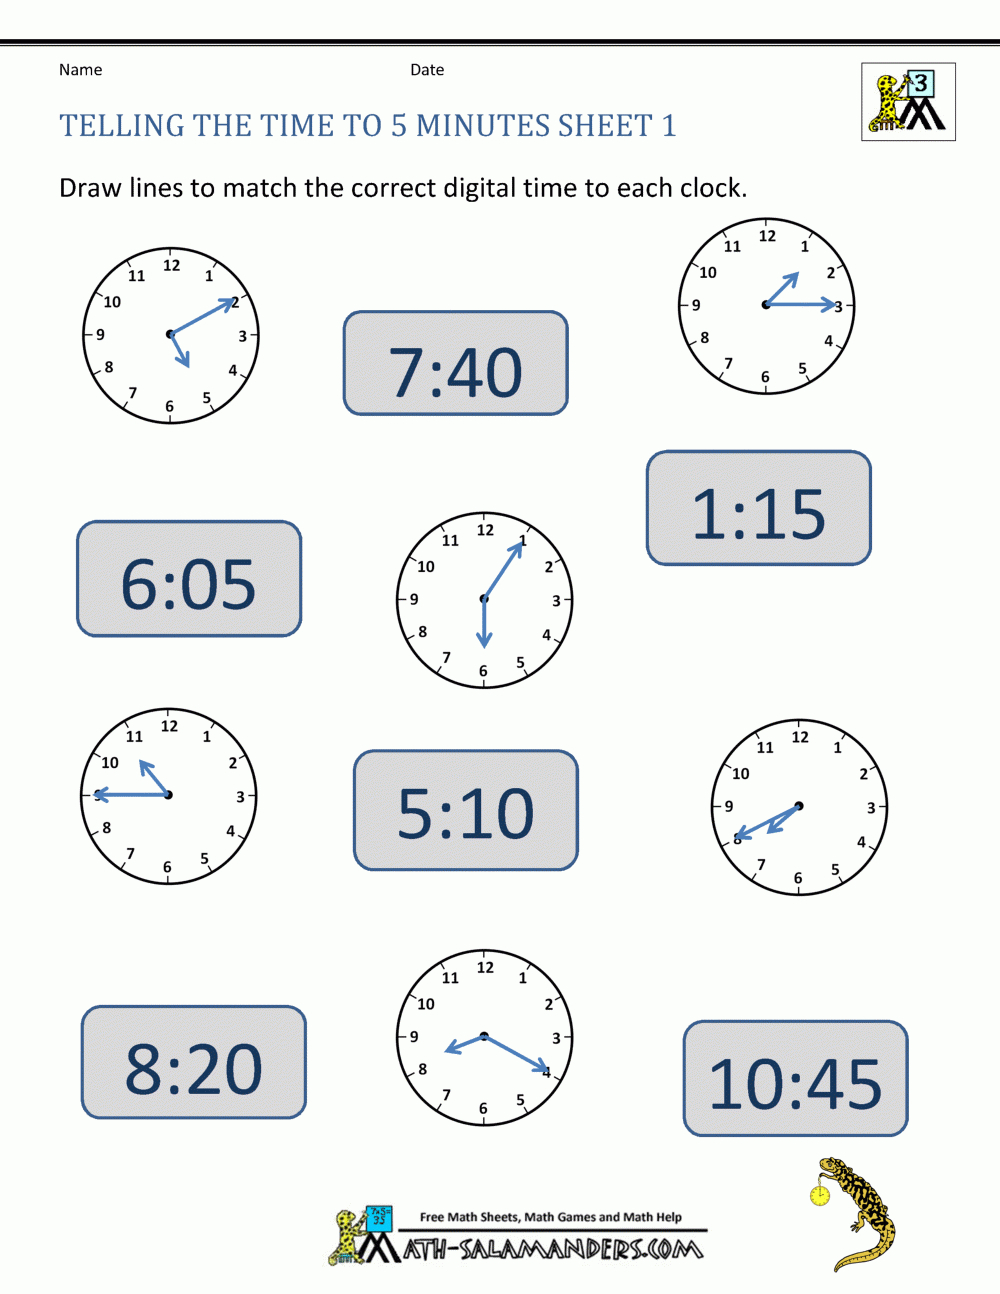 time-oclock-1-tmk-education-what-time-is-it-o-clock-worksheets